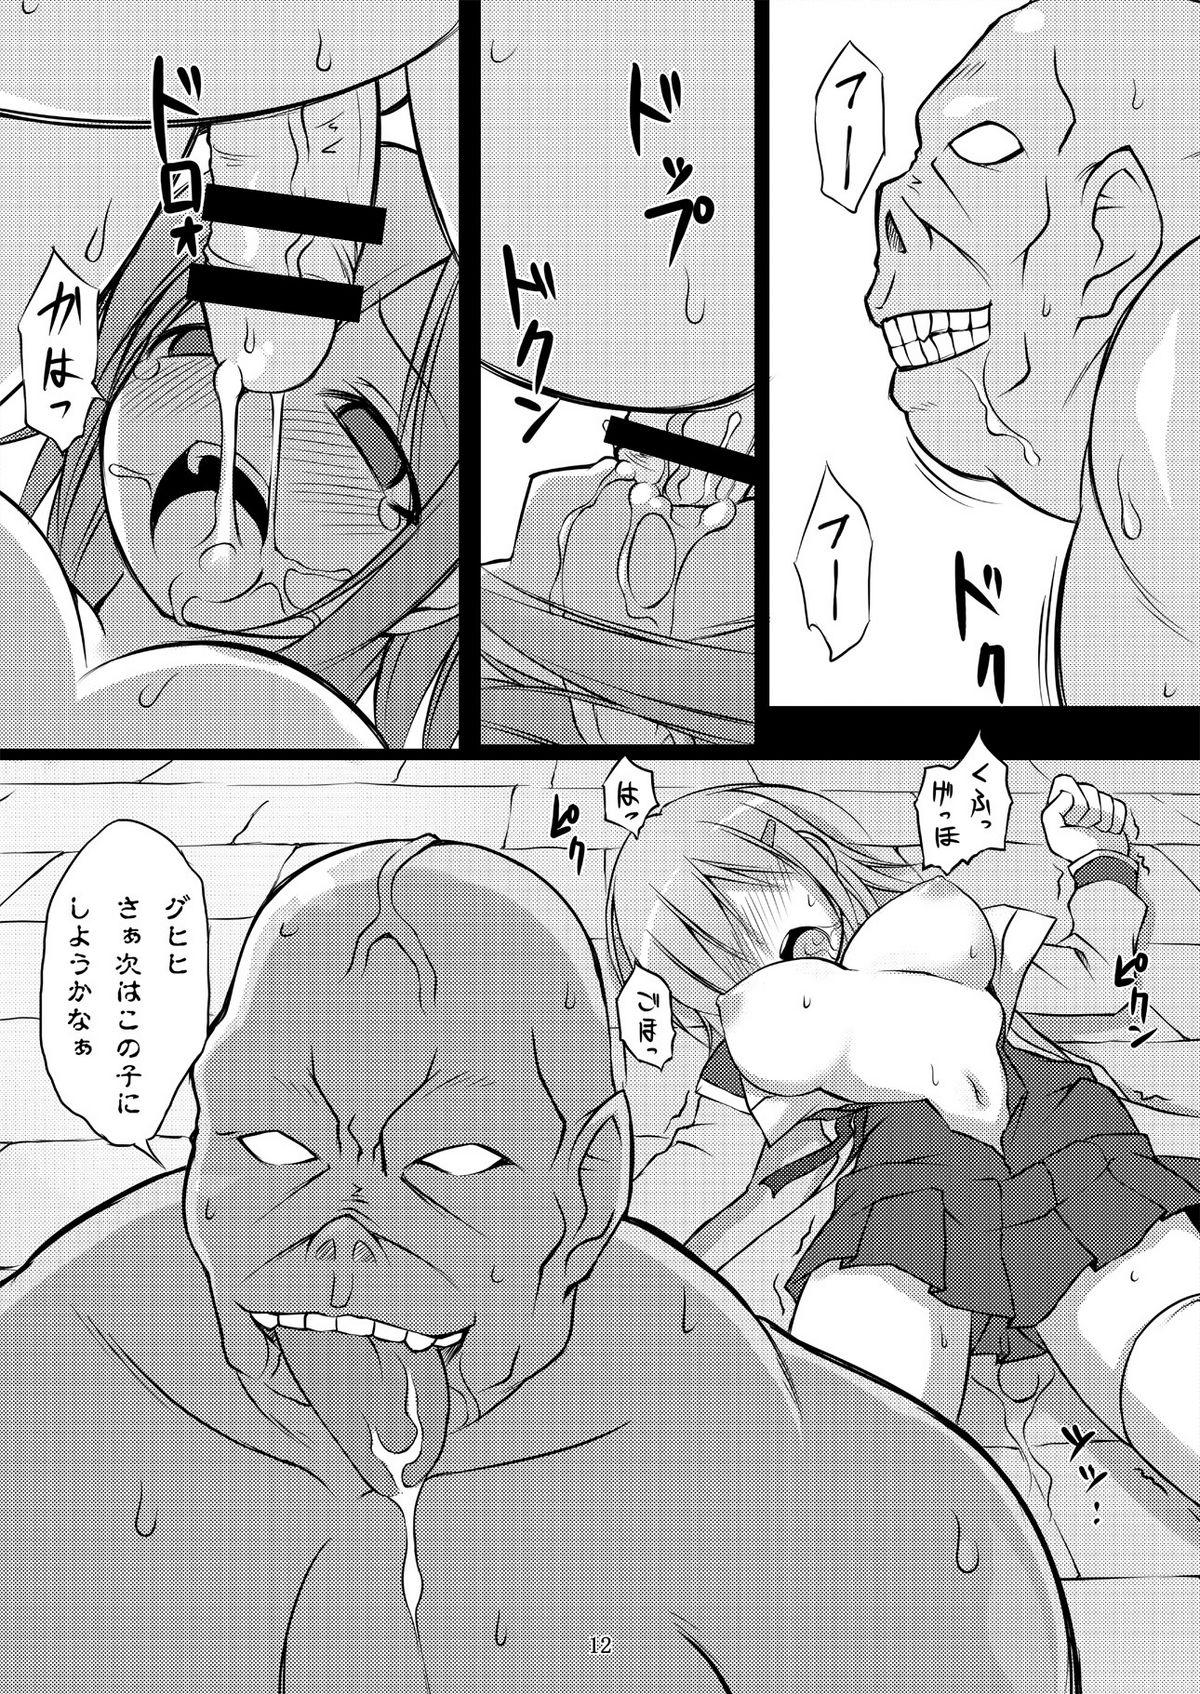 Orgasmo 魔法戦士触獄に堕つ～獄卒の洗礼～ Wet Cunt - Page 12